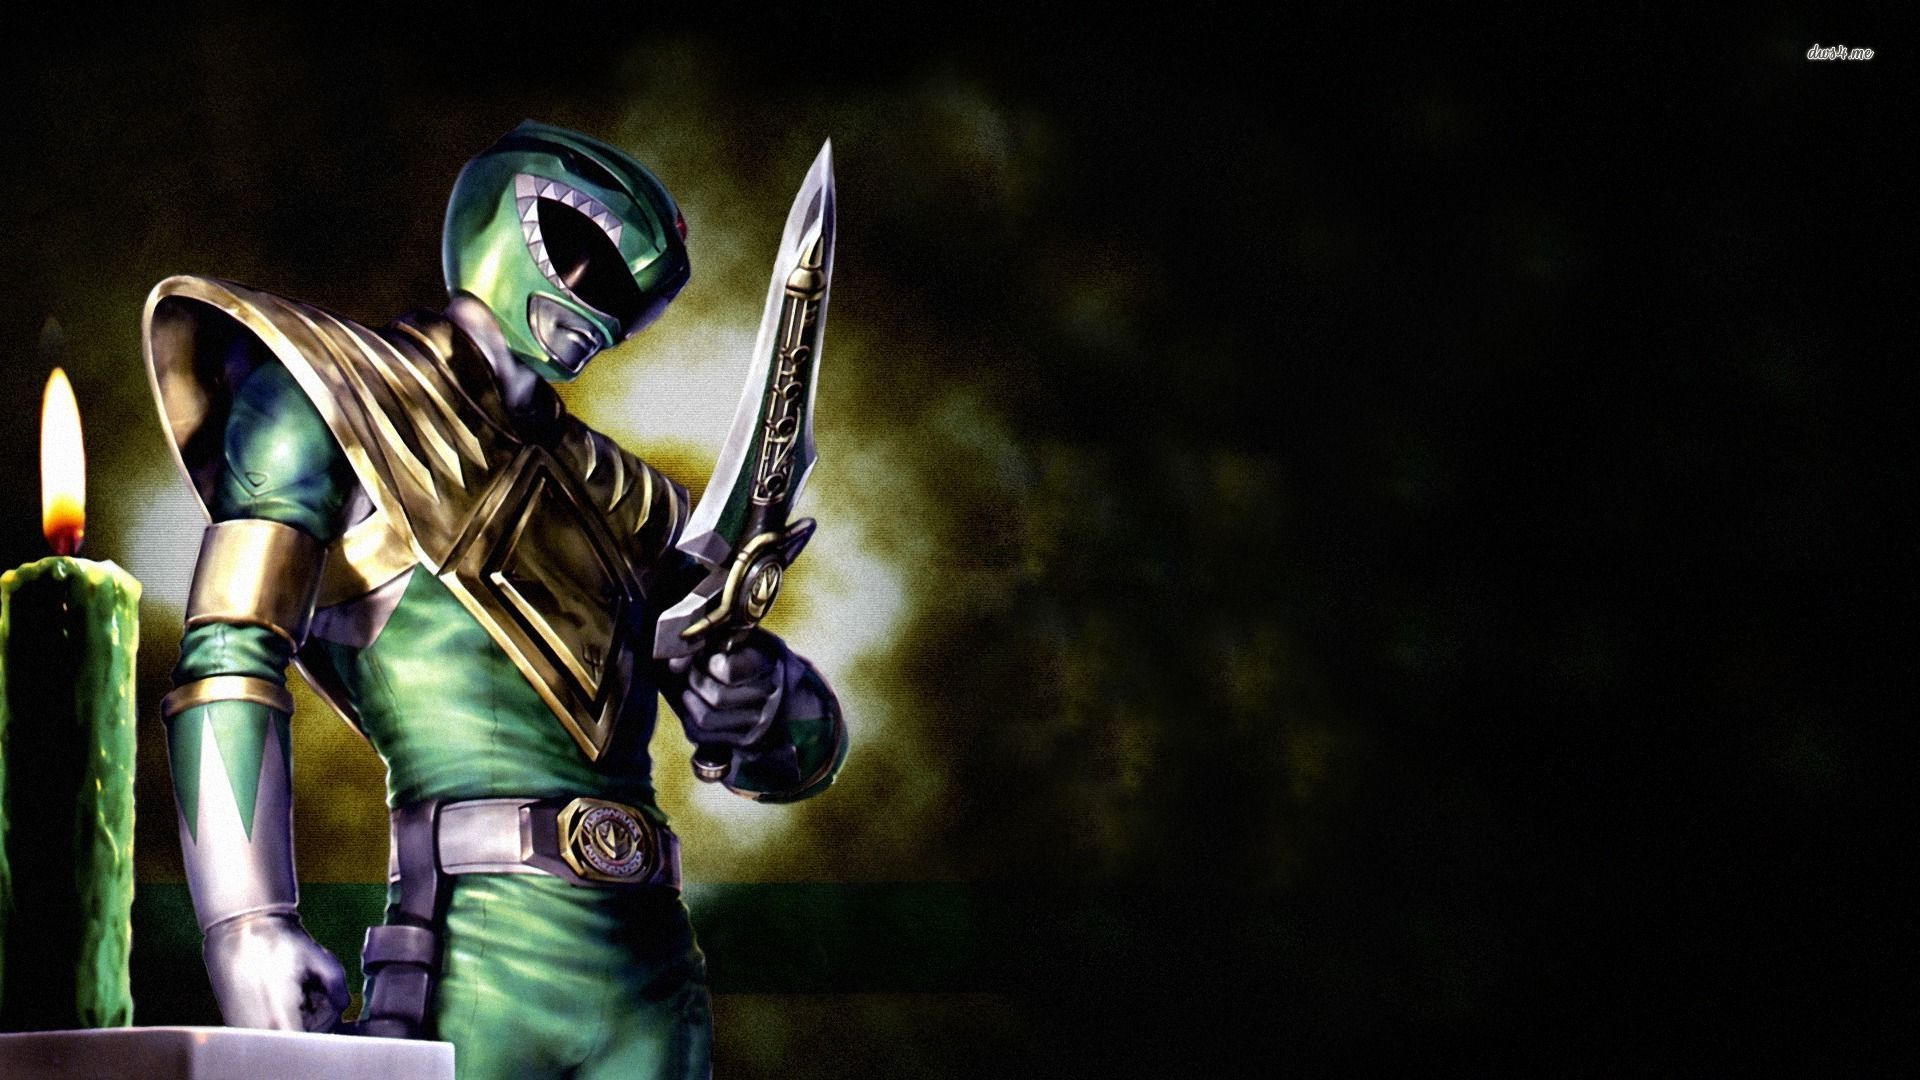 power rangers wallpaper,action adventure game,fictional character,action figure,pc game,cg artwork